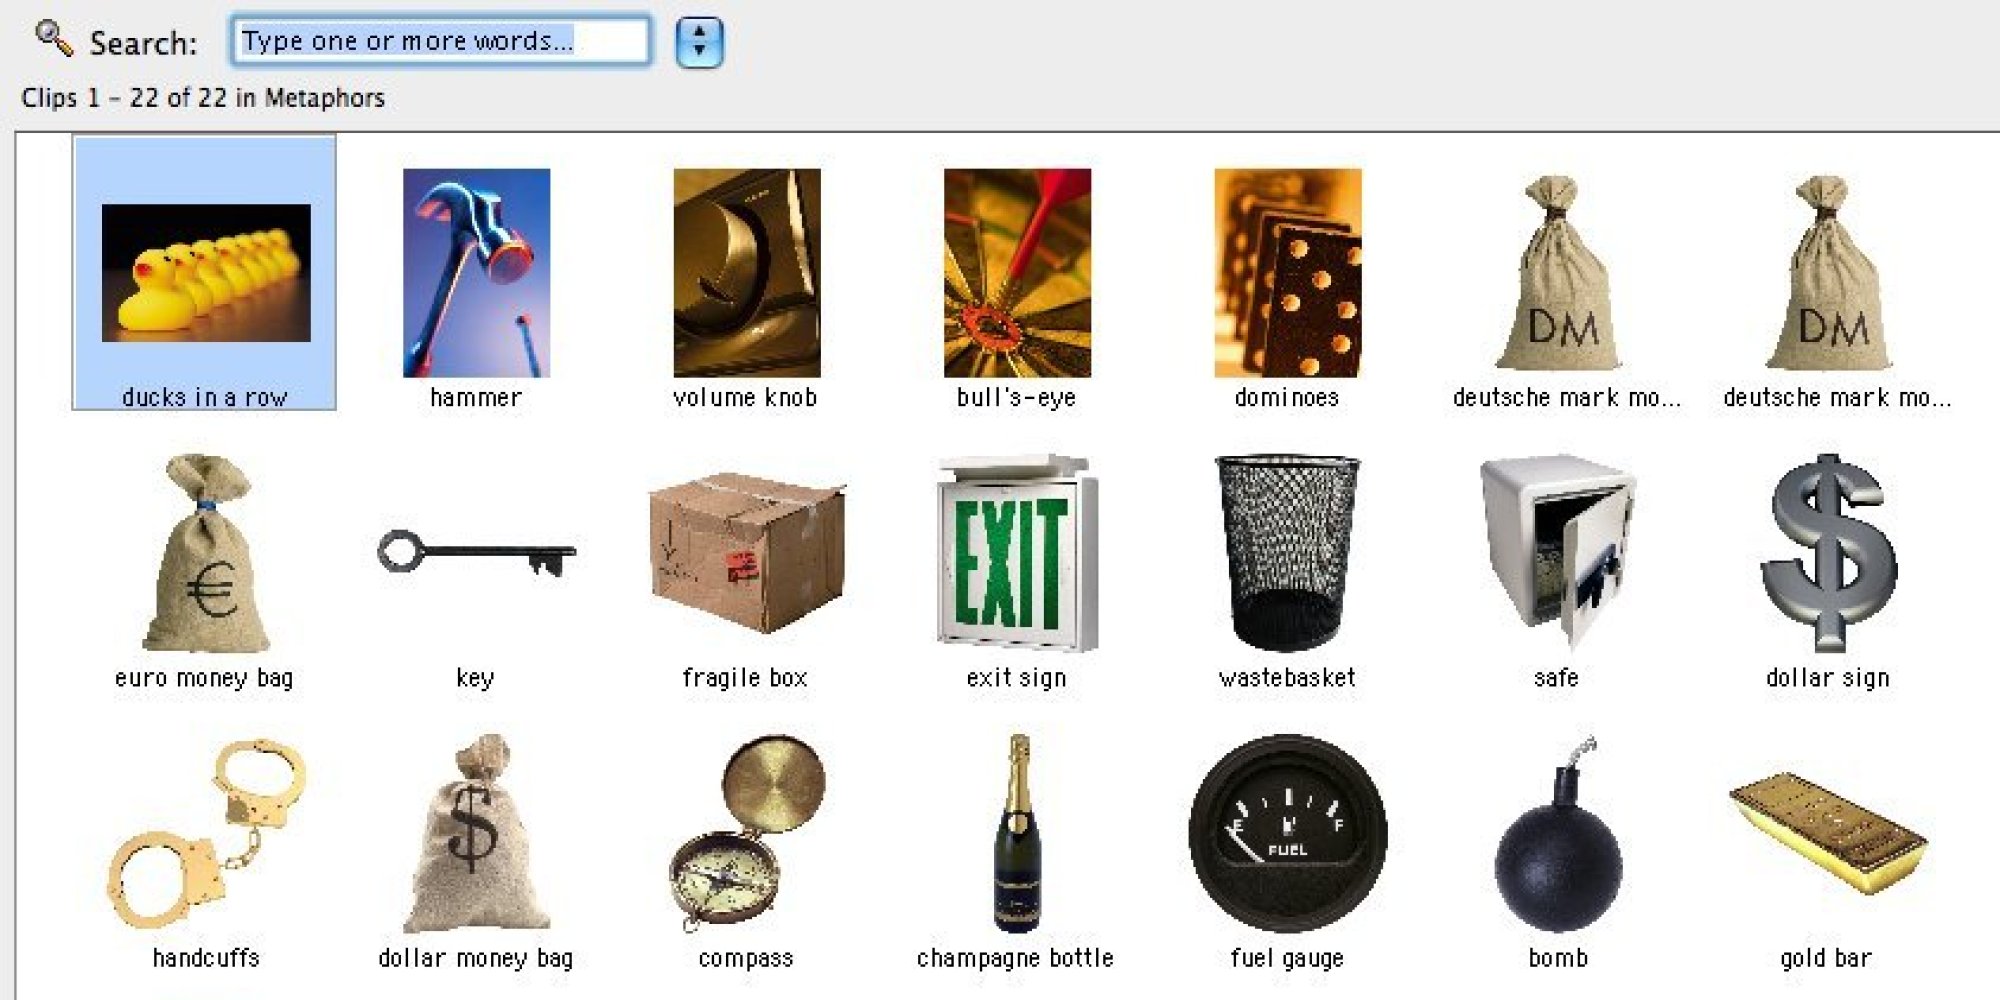 microsoft clipart gallery gone - photo #46